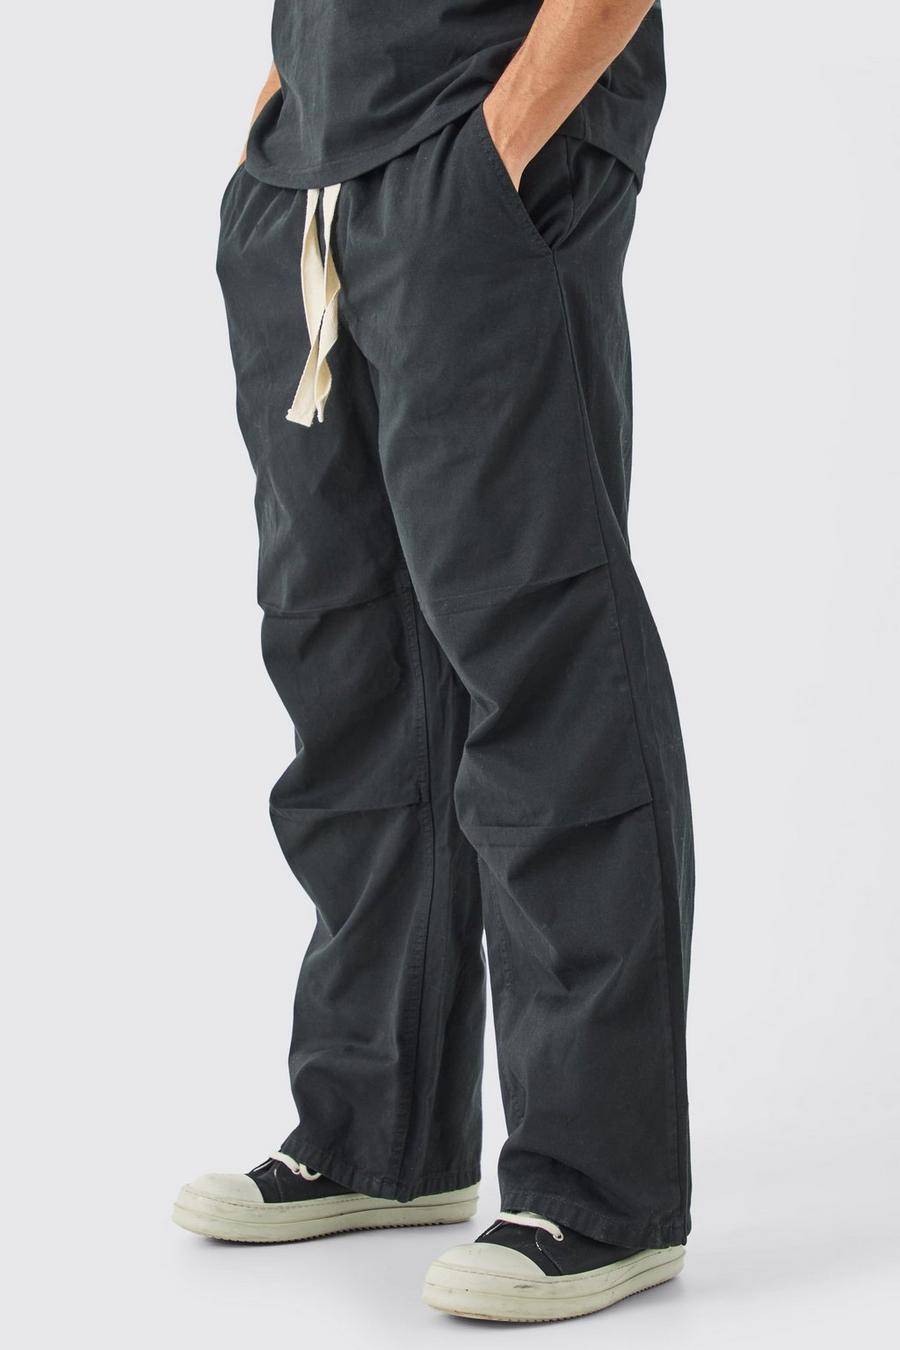 Charcoal Elastic Waist Contrast Drawcord Baggy Trouser 